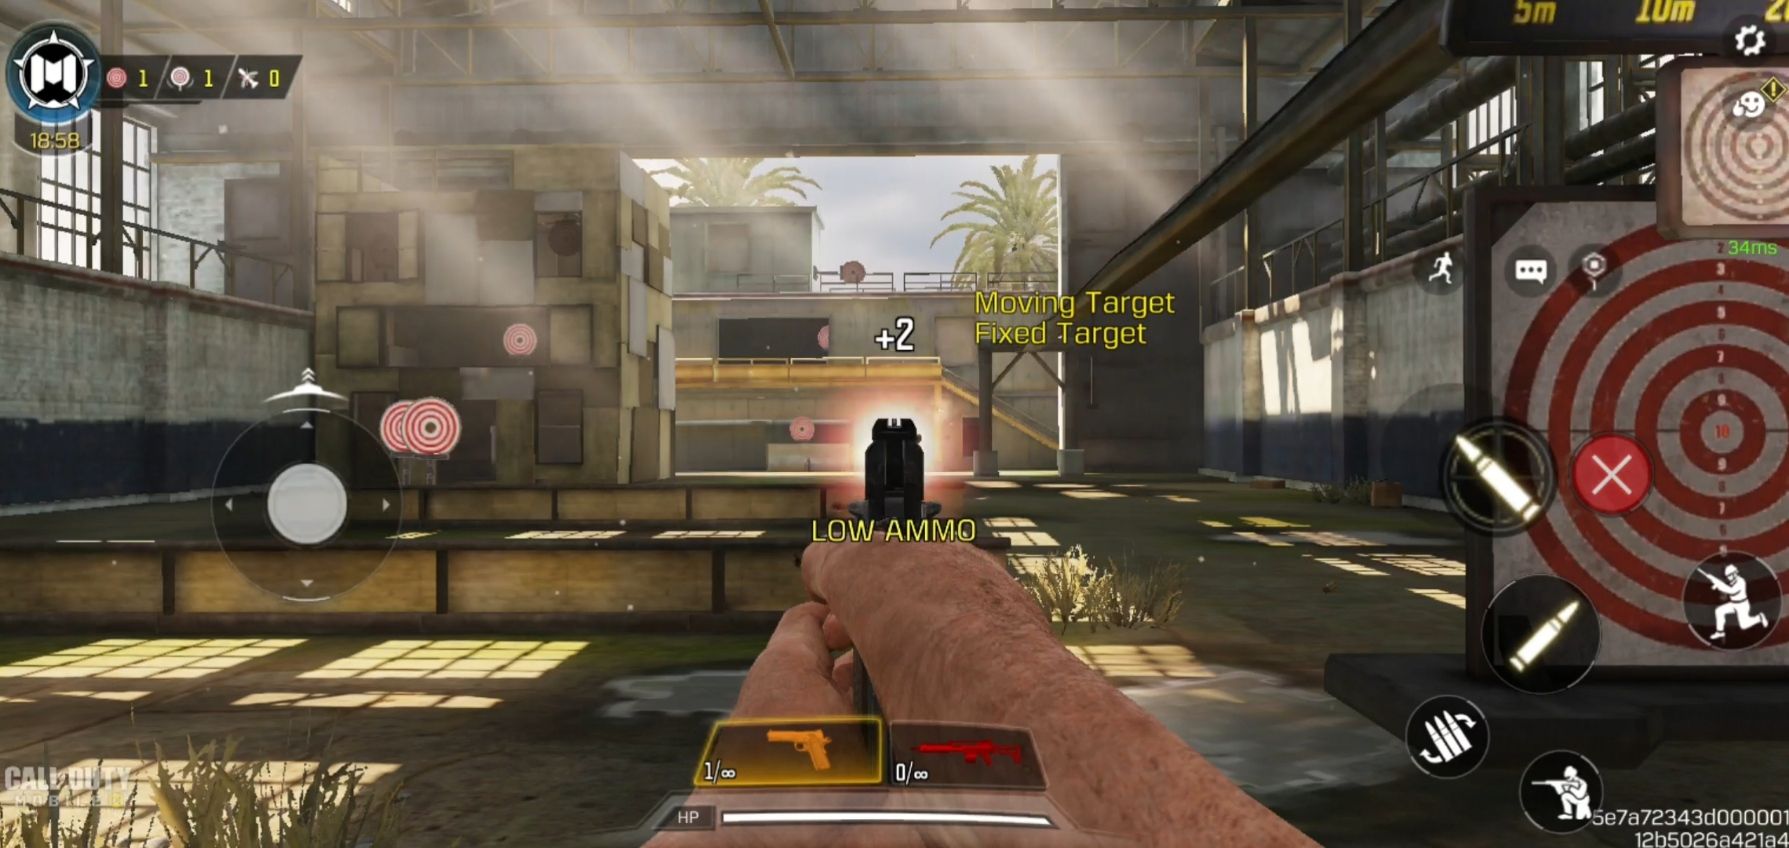 firing a pistol in COD:M in the target practice area